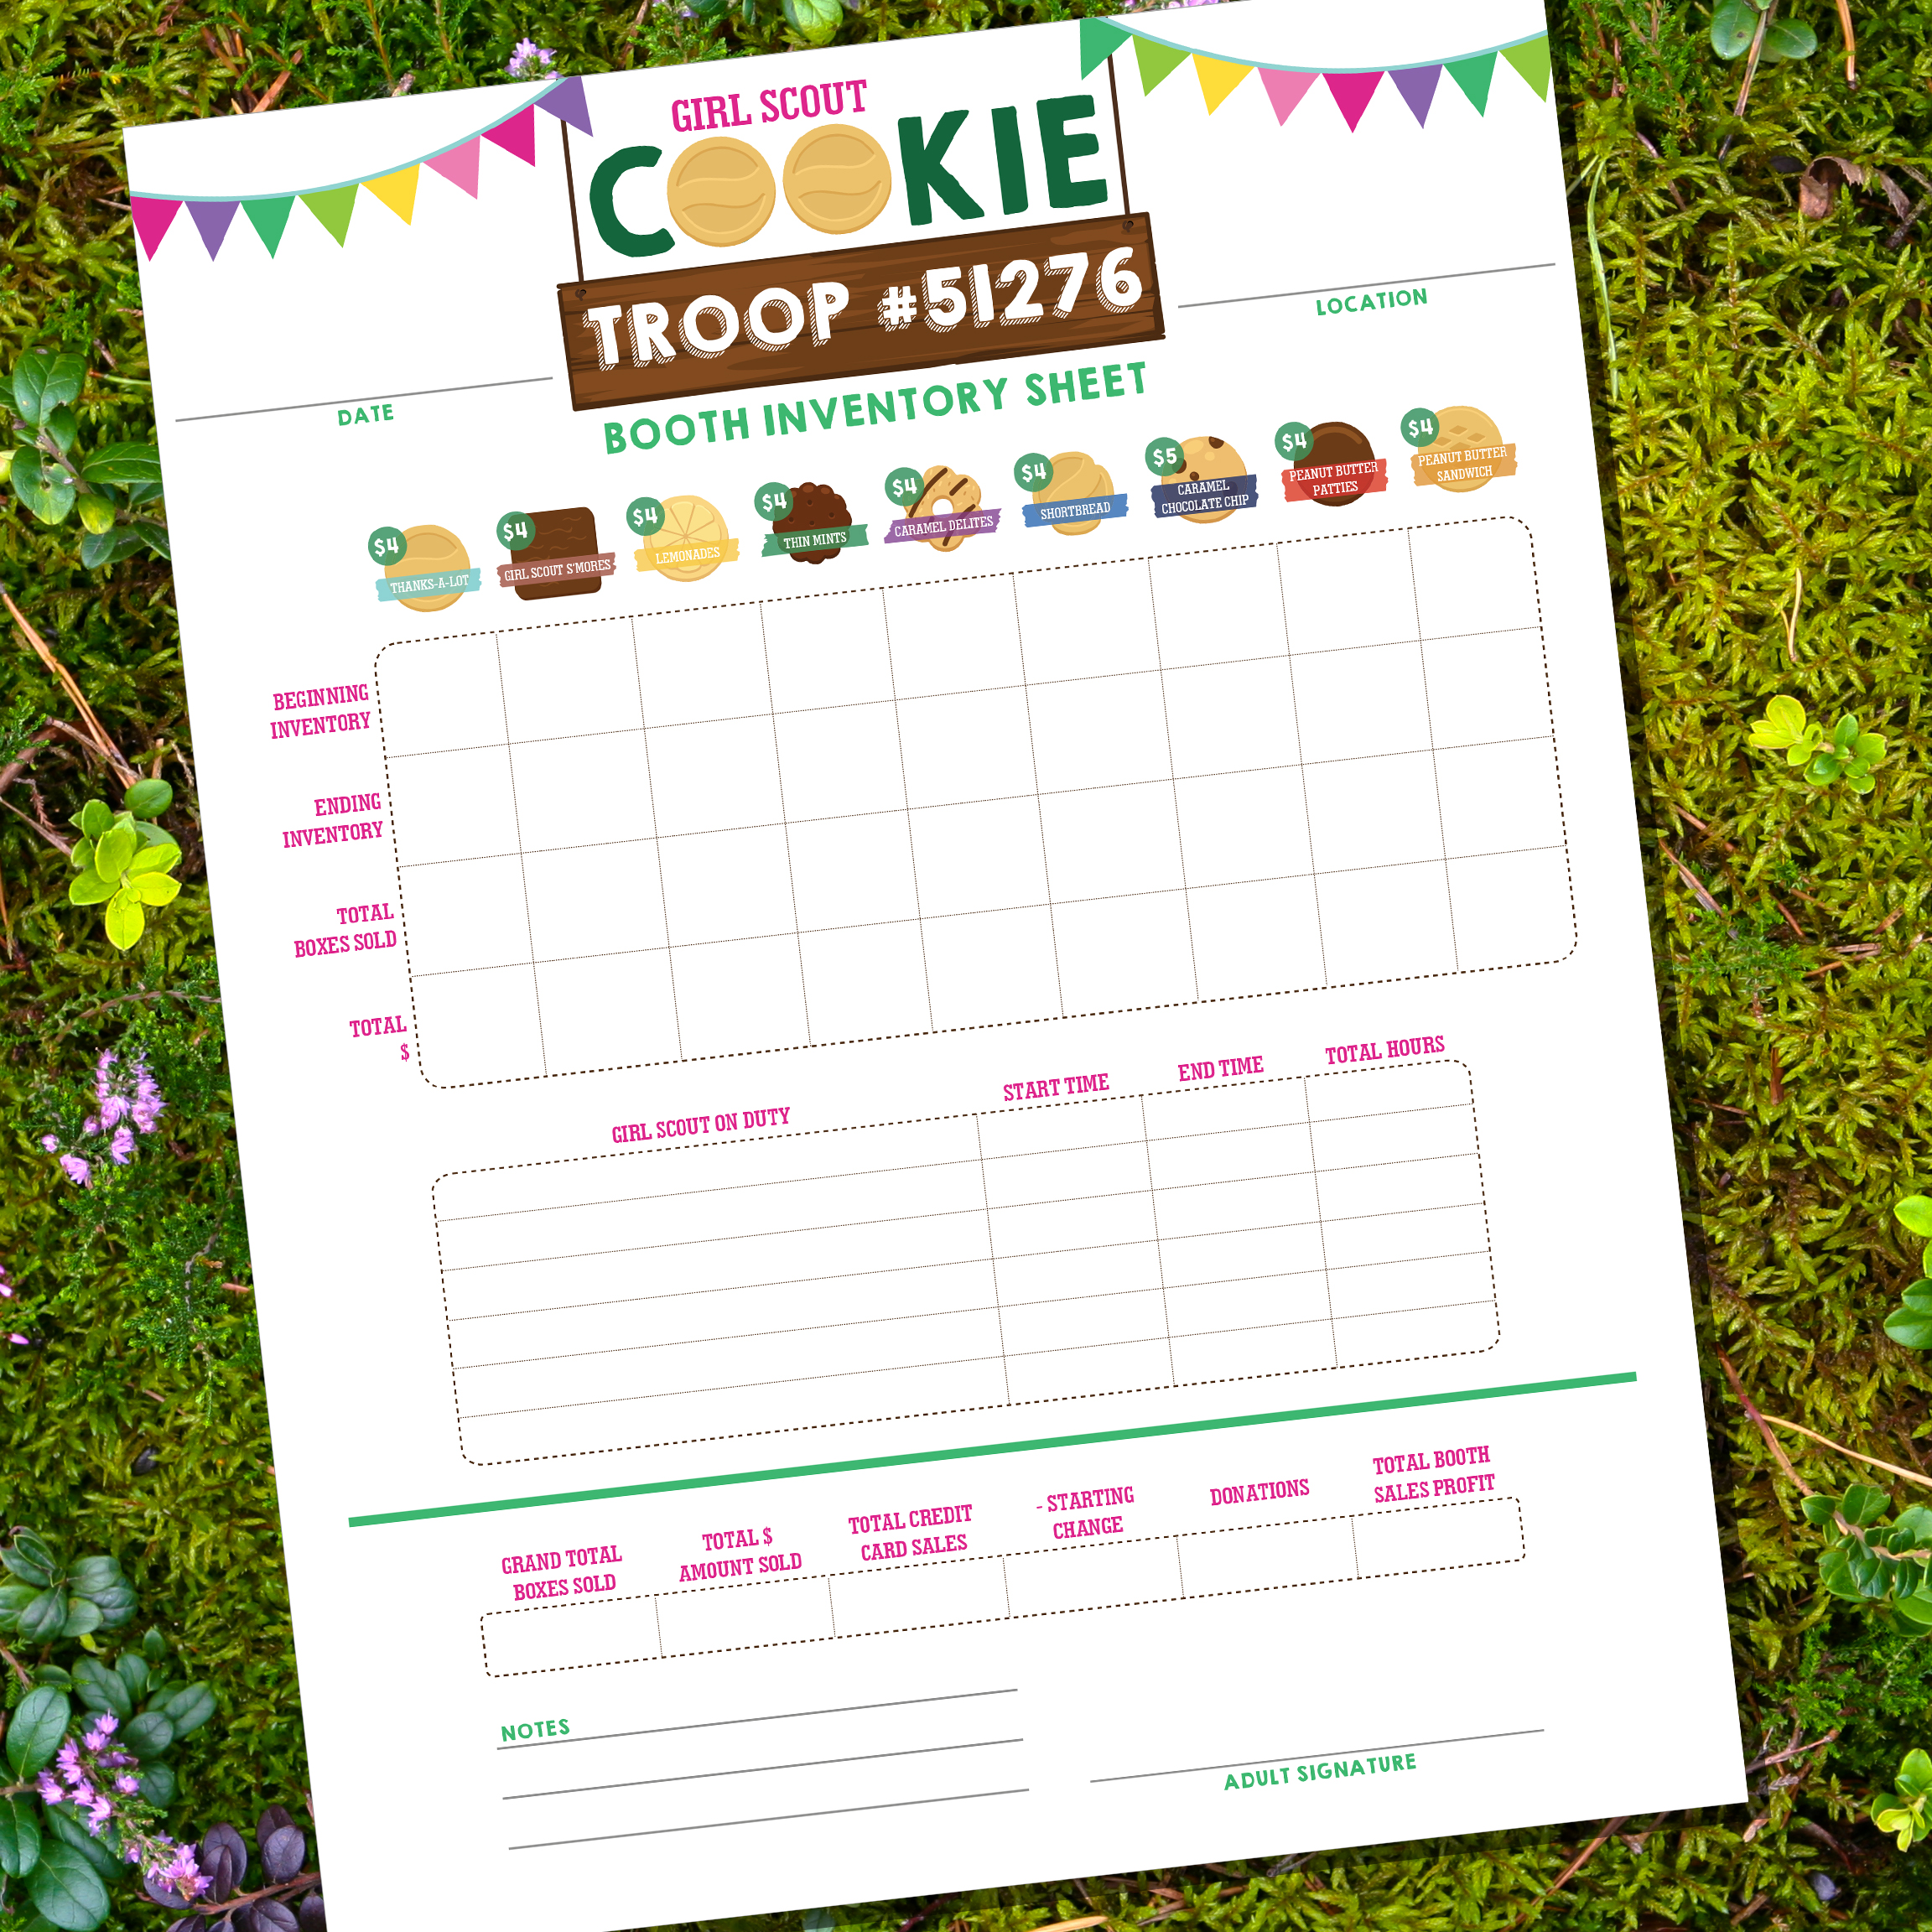 Girl Scout Cookie Inventory Sheet